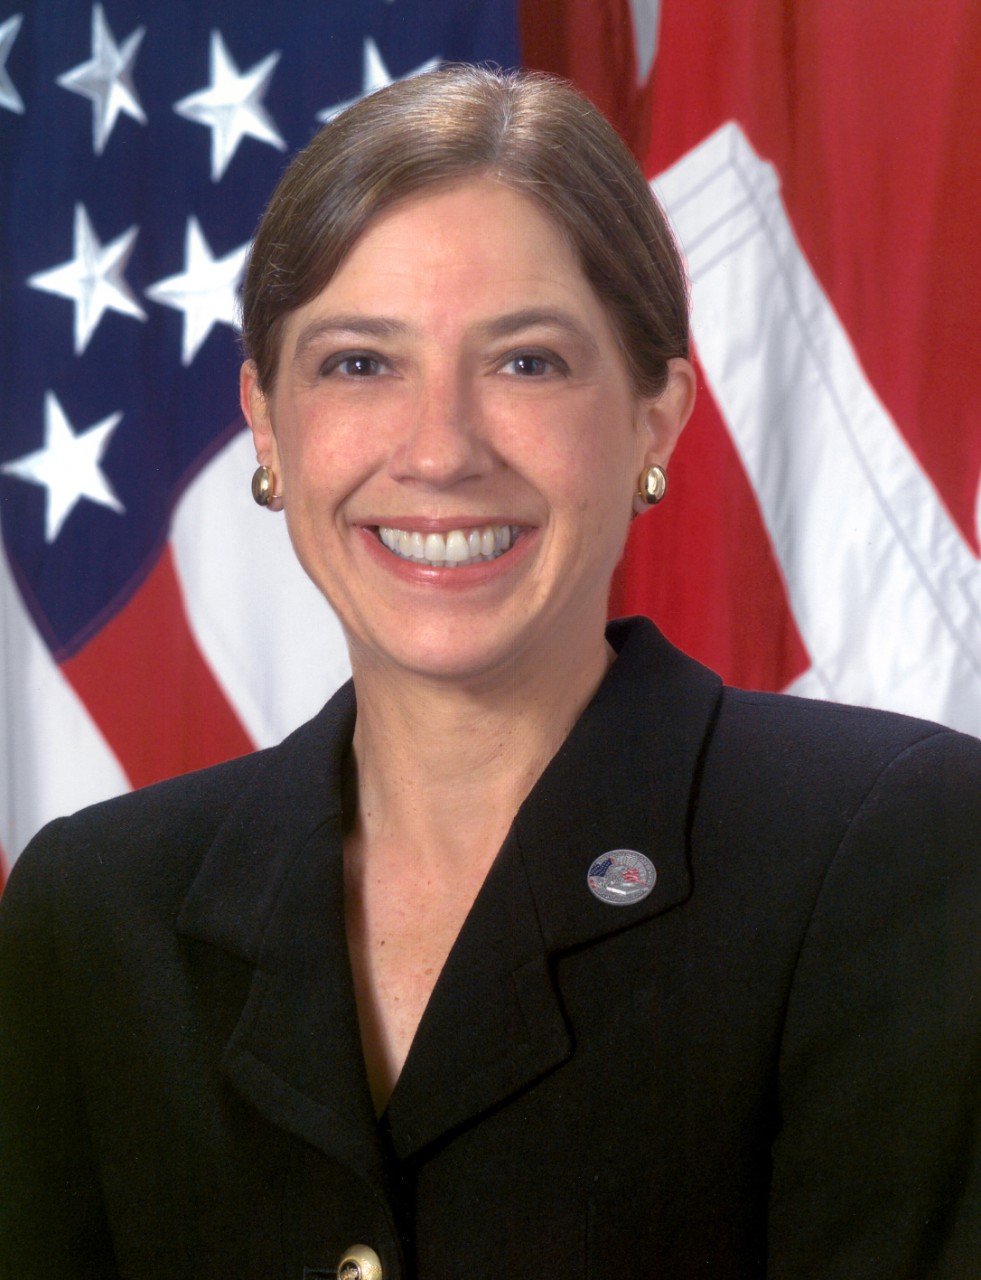 Susan Morrisey Livingstone, First Female Acting Secretary of the Navy